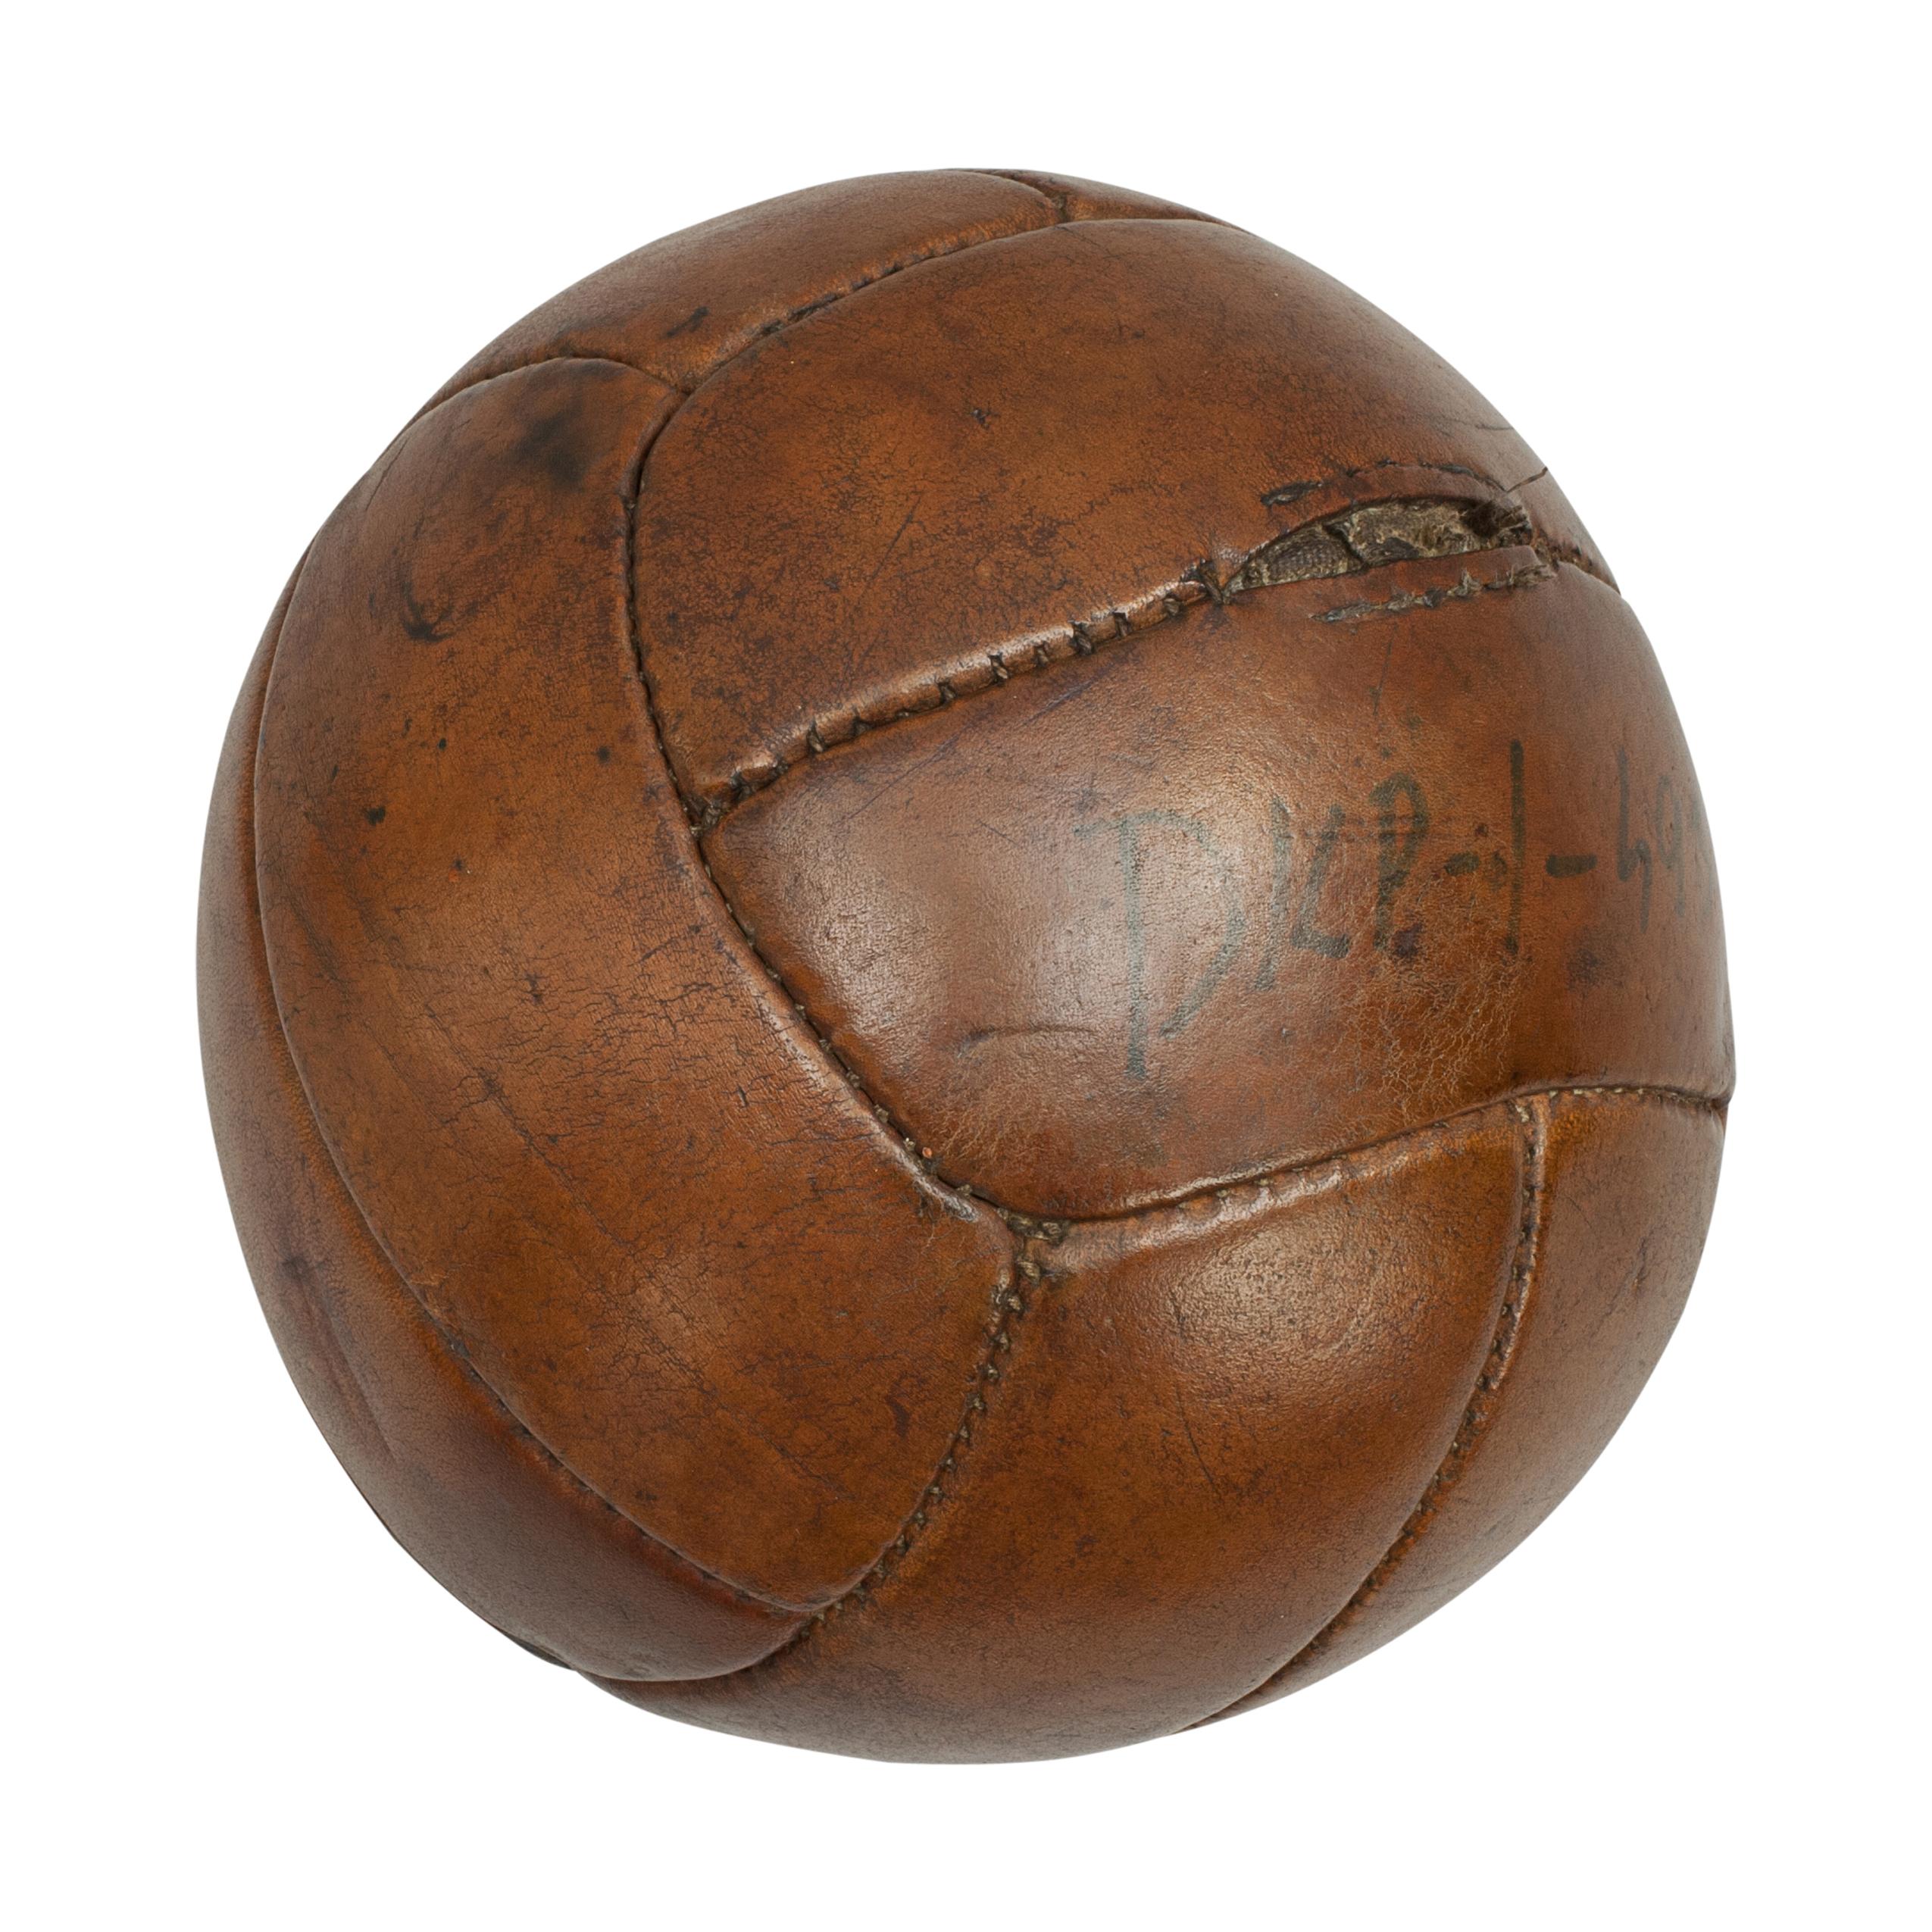 Vintage leather medicine ball.
A good vintage leather medicine ball in the shape of a football. It is made from twelve leather panels and the leather has a nice tan polished finish. Written on one of the panels 'DKP - I - S933'.
This ball is